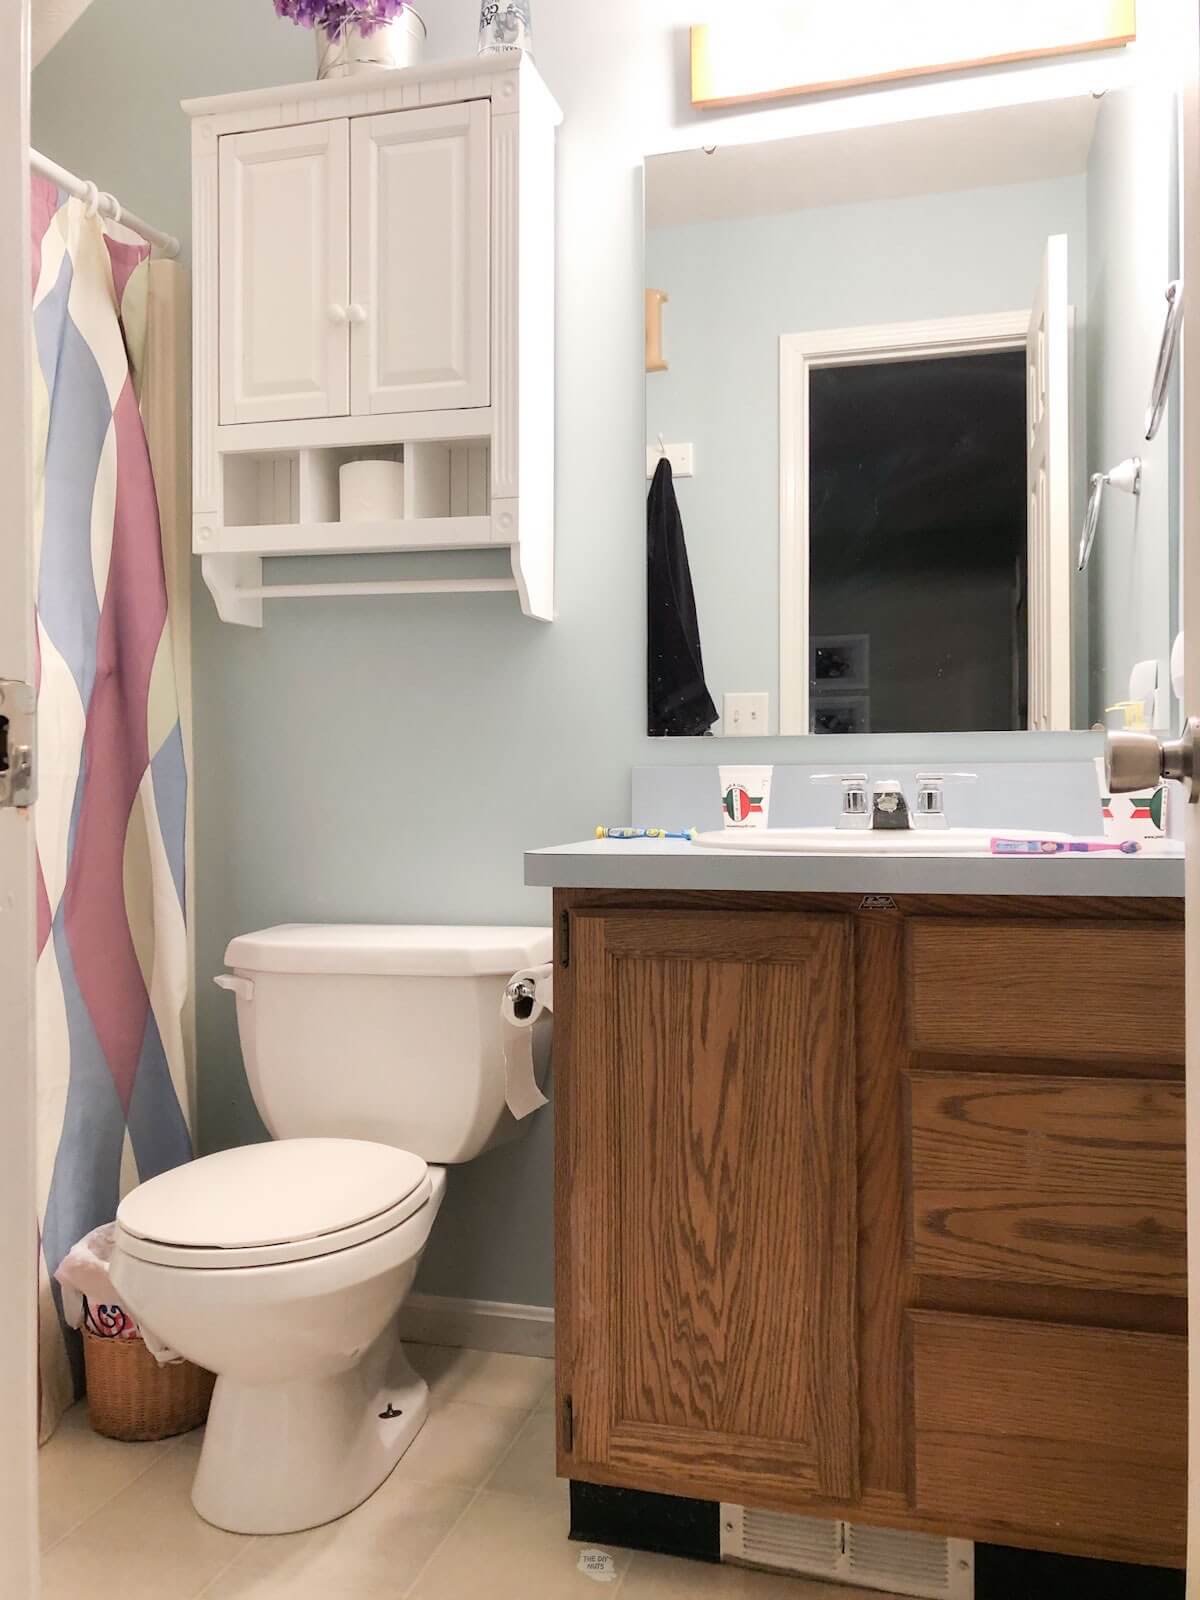 Dated oak cabinet vanity in small bathroom with blue walls, toilet and white cabinet on wall.